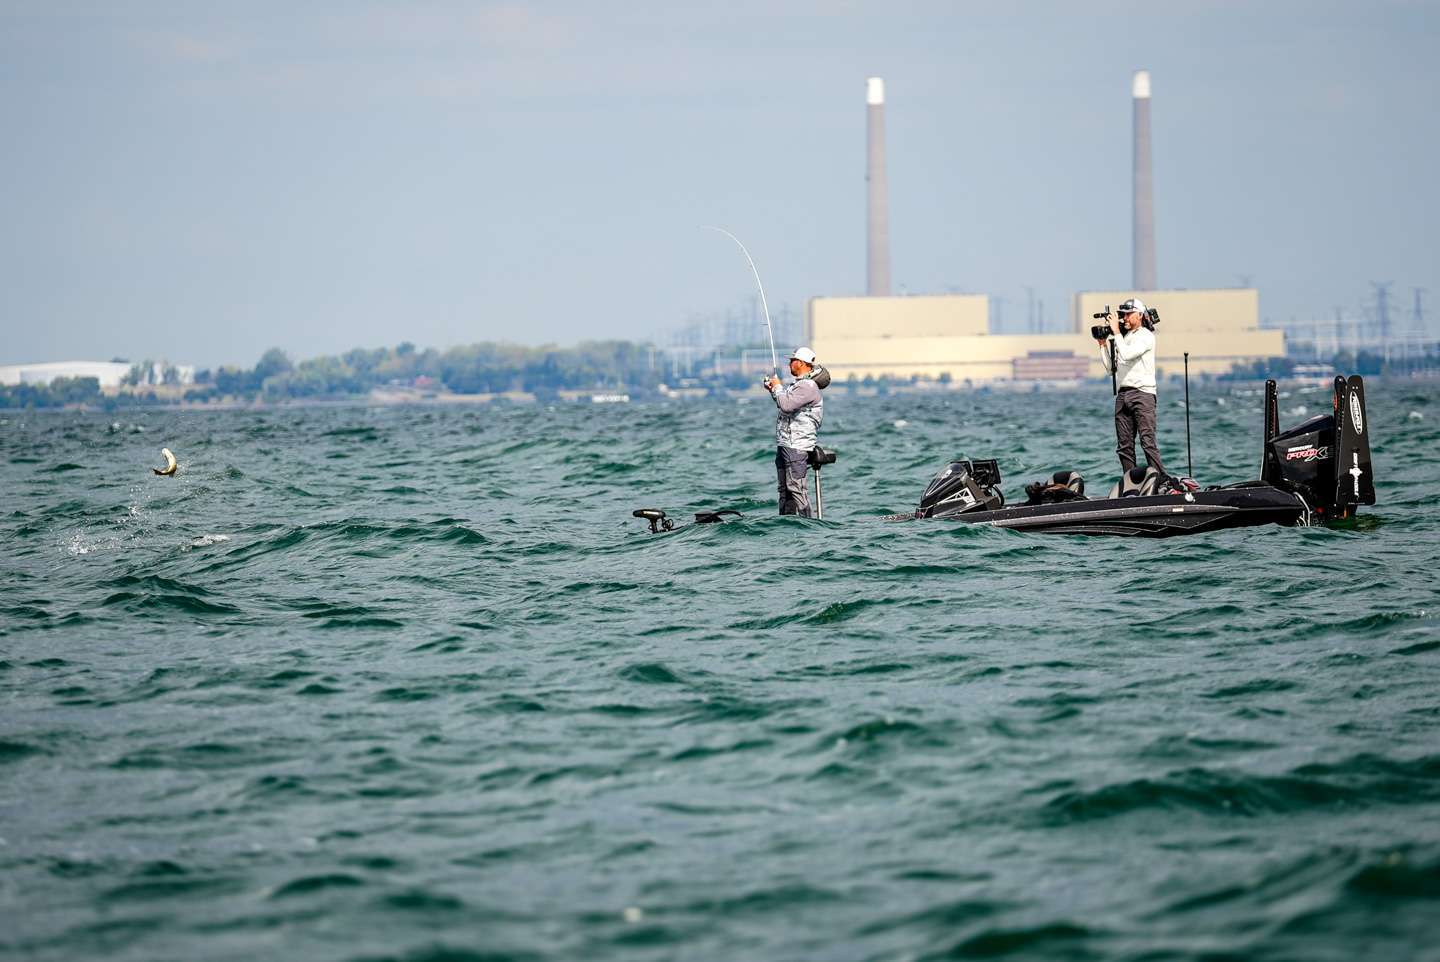 <b>St. Lawrence River, New York</b><br>
The tournament headquarters in Clayton set up perfectly for anglers to fish two playing fields, the St. Lawrence River and Lake Ontario. Fight the waves, maintain boat control and make precise lure presentations on the big water and youâd be in the hunt. 
